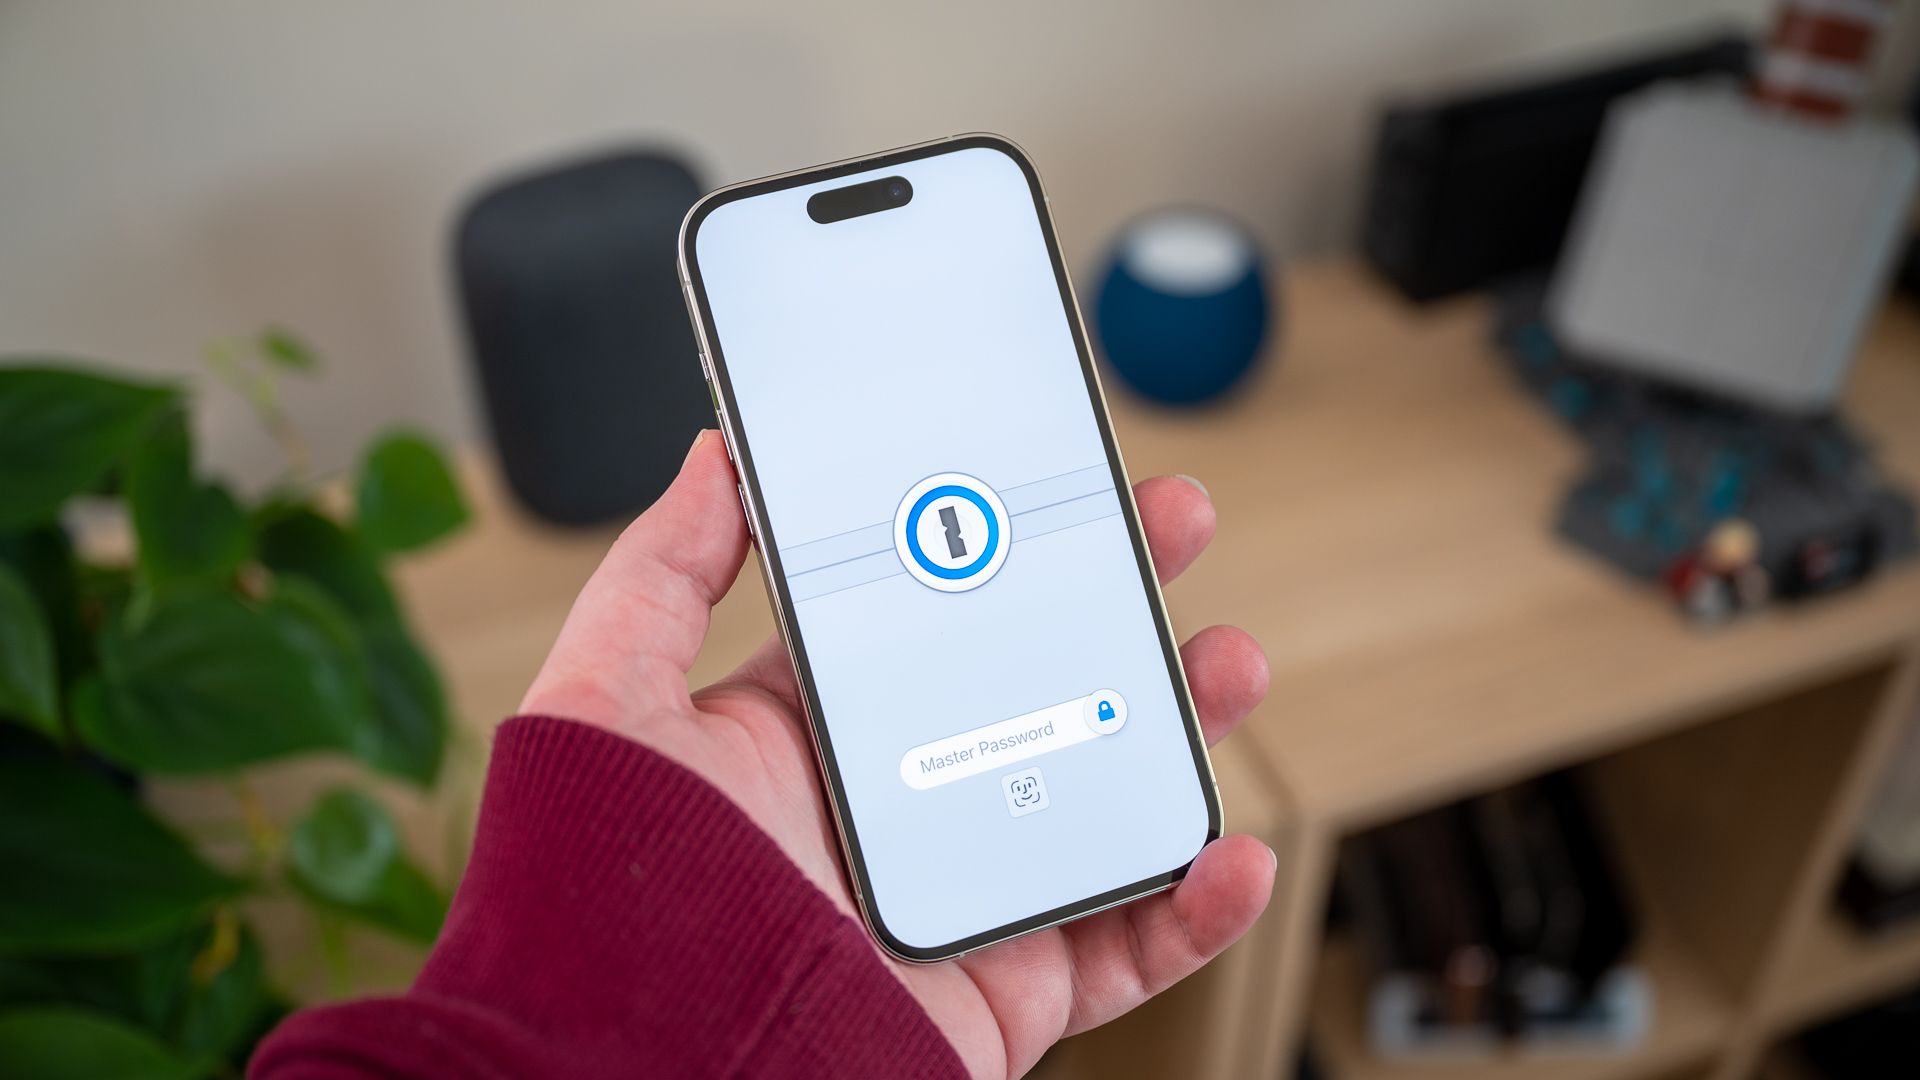 1Password password manager running on an Apple iPhone 14 Pro